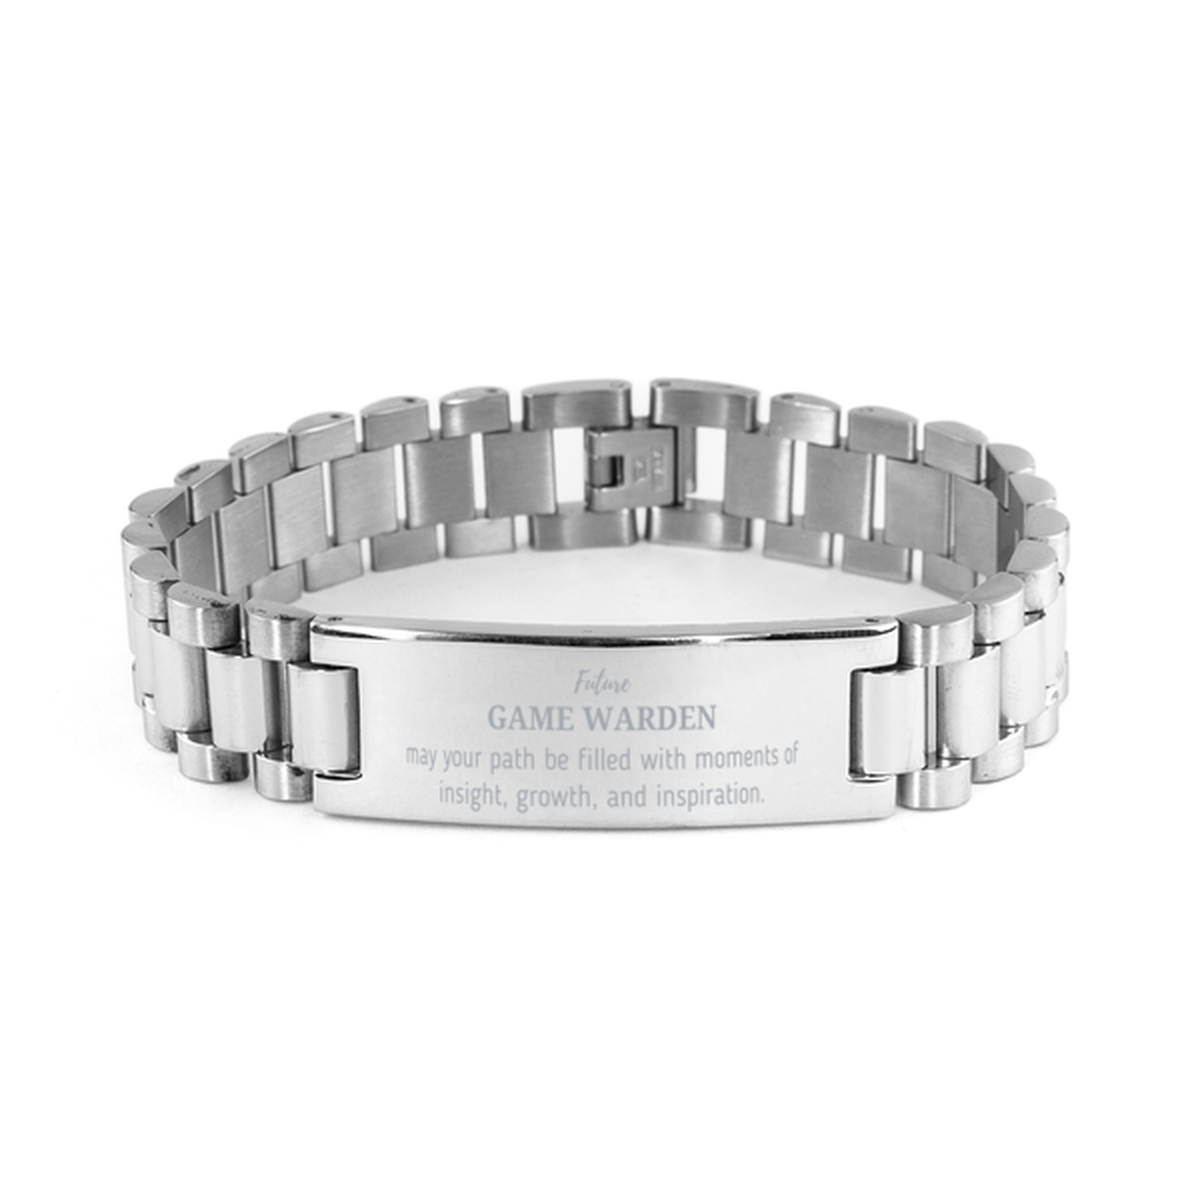 Future Game Warden Gifts, May your path be filled with moments of insight, Graduation Gifts for New Game Warden, Christmas Unique Ladder Stainless Steel Bracelet For Men, Women, Friends